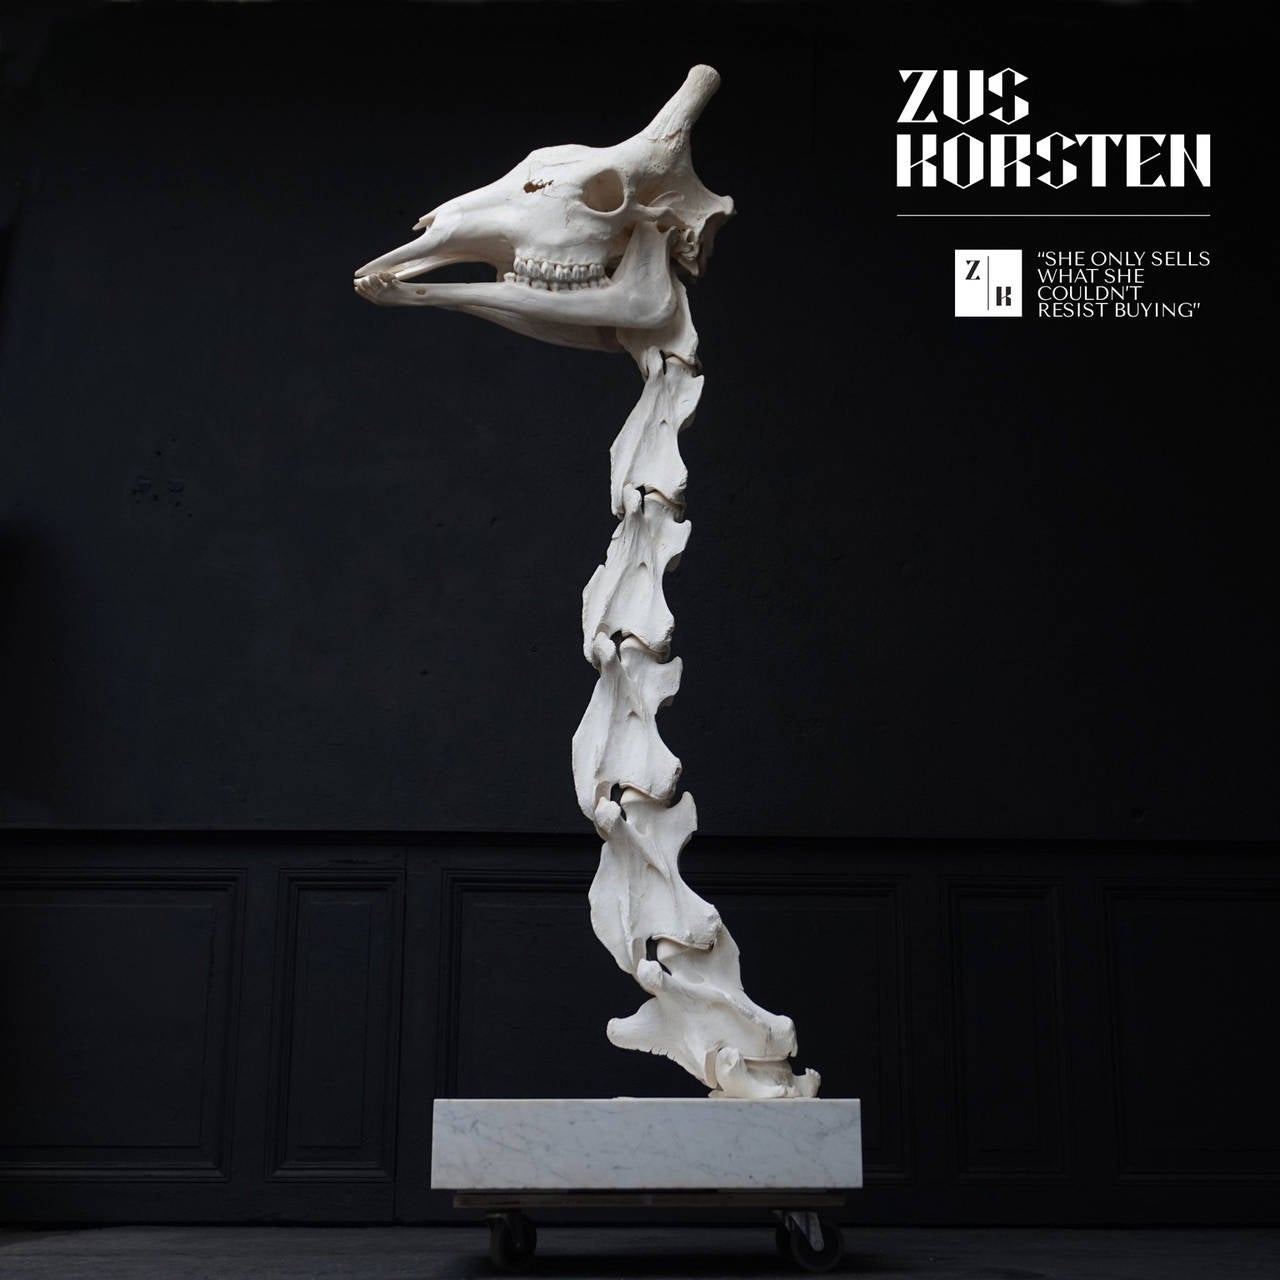 A museum mounted juvenile Giraffe skeleton of neck and head. It is mounted on a solid marble base.